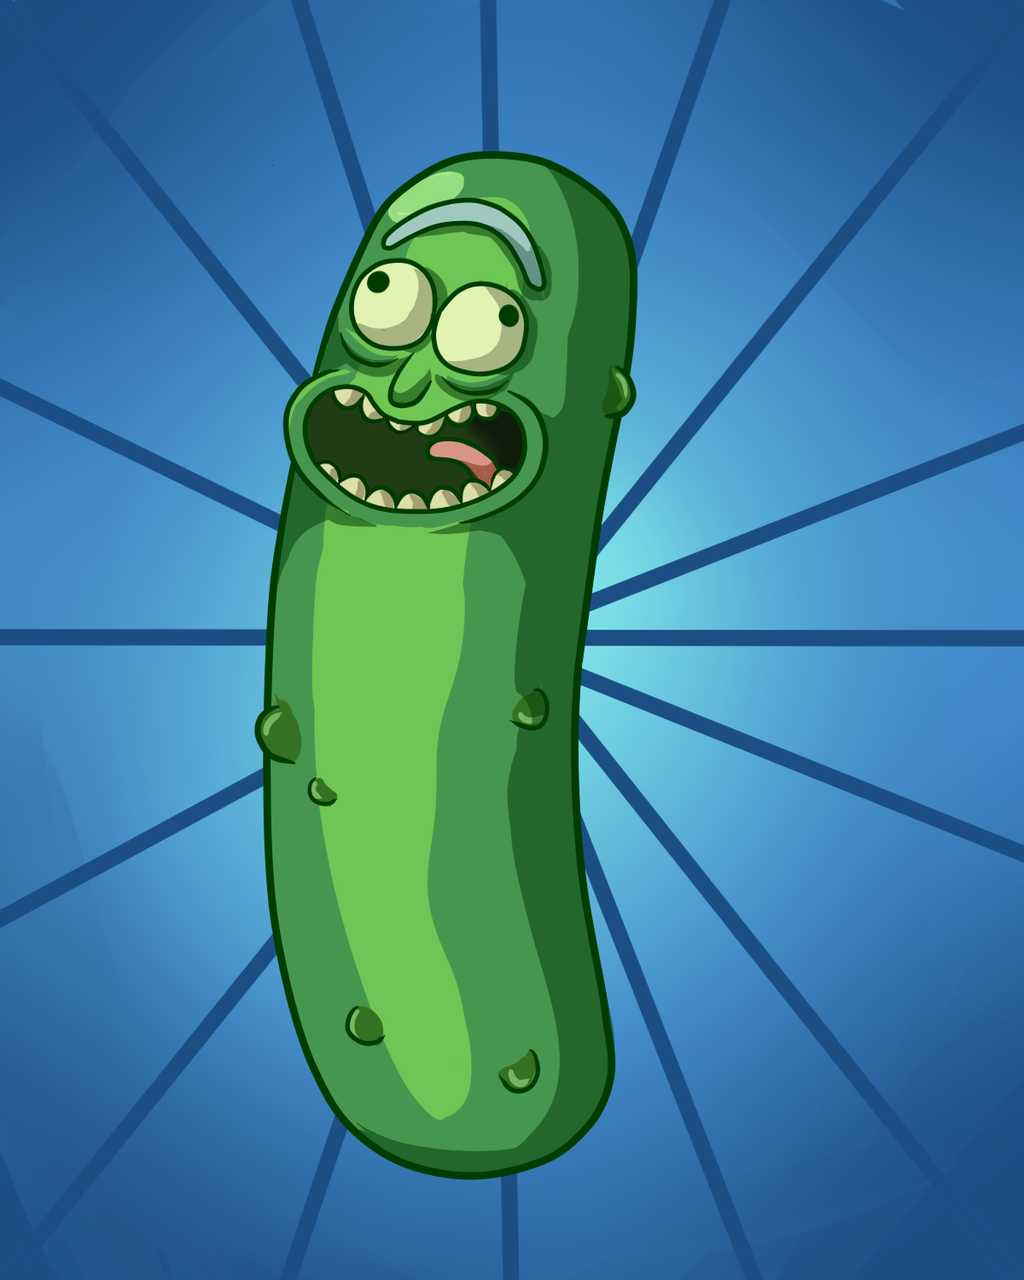 Unfortunately, rick has been transformed into a pickle and it is up to us t...